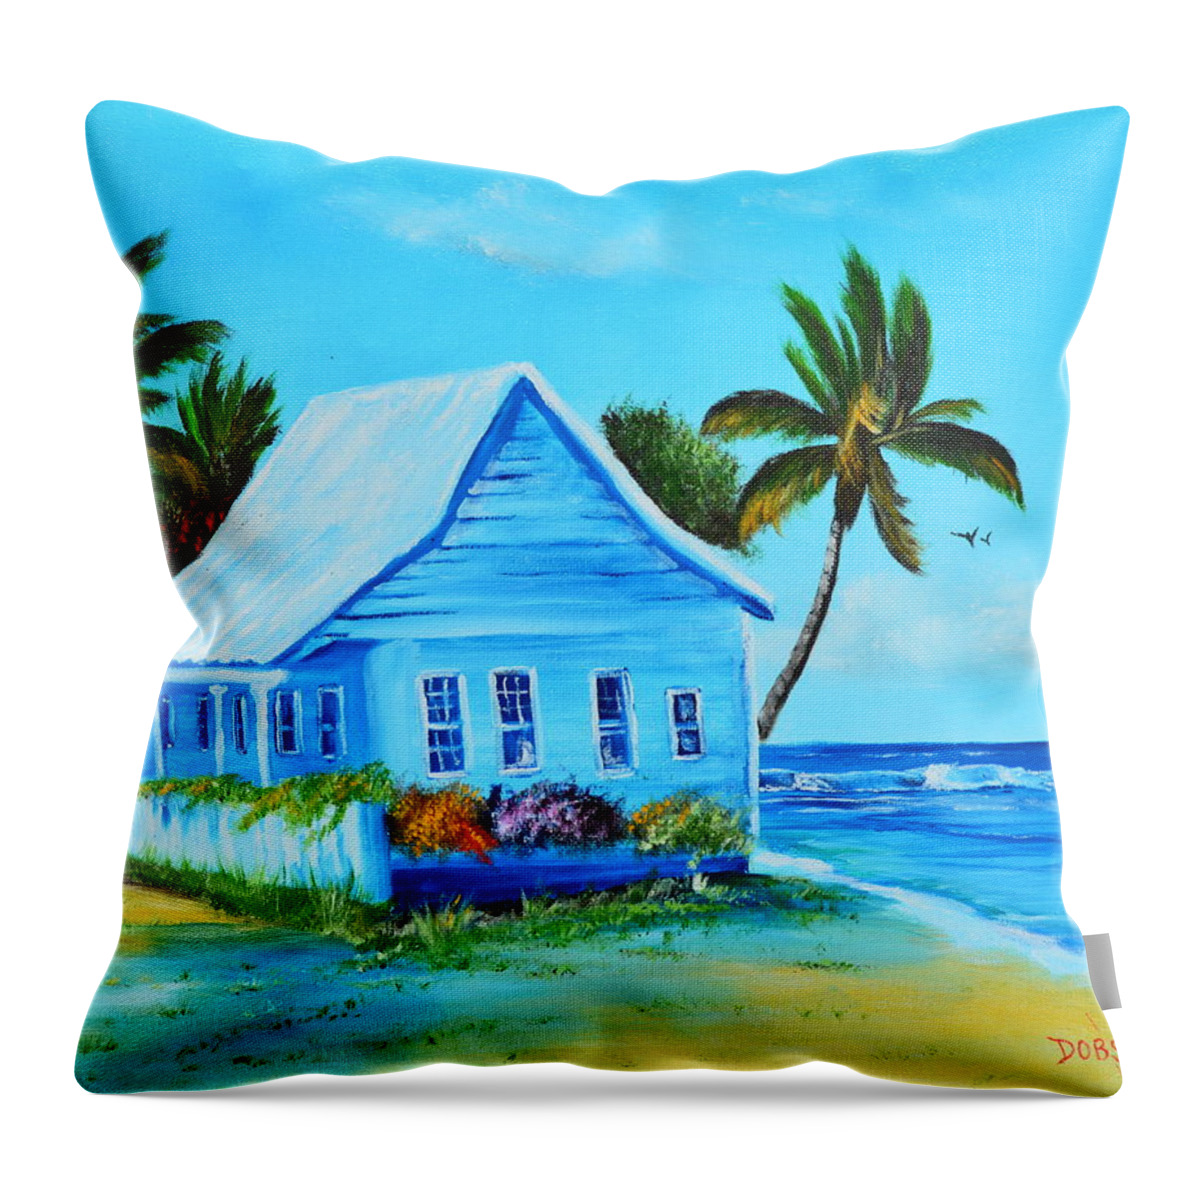 Shack In Jamaica Throw Pillow featuring the painting Shanty In Jamaica by Lloyd Dobson